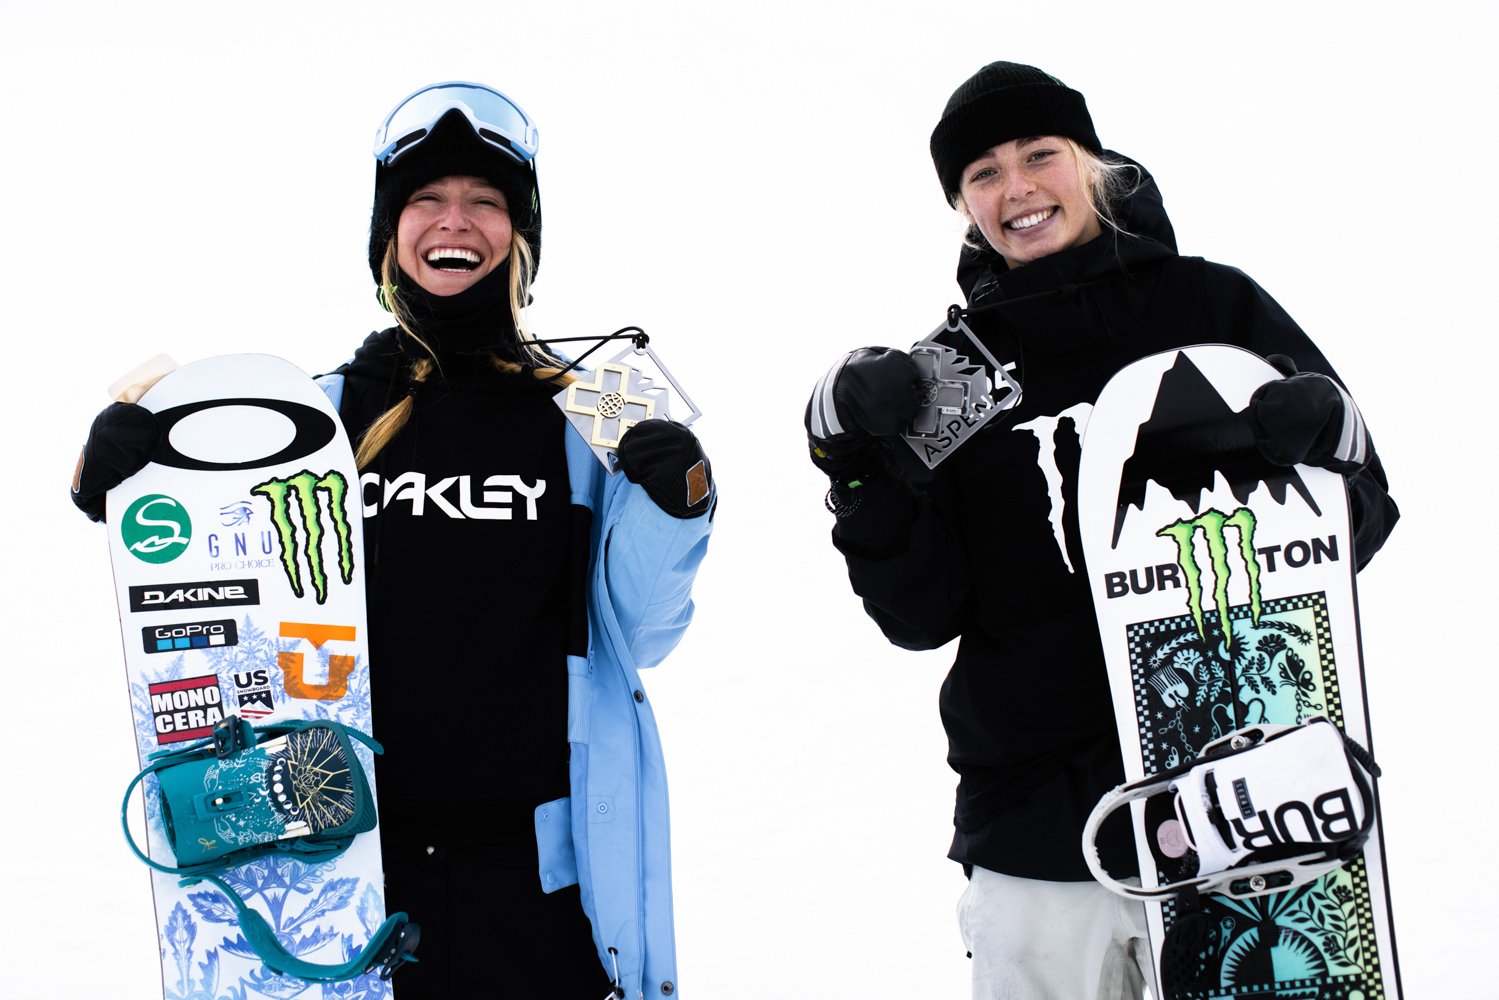 Monster Energy's Jamie Anderson and Zoi Sadowski-Synott Take Gold and Silver in Women's Snowboard Slopestyle at X Games Aspen 2021